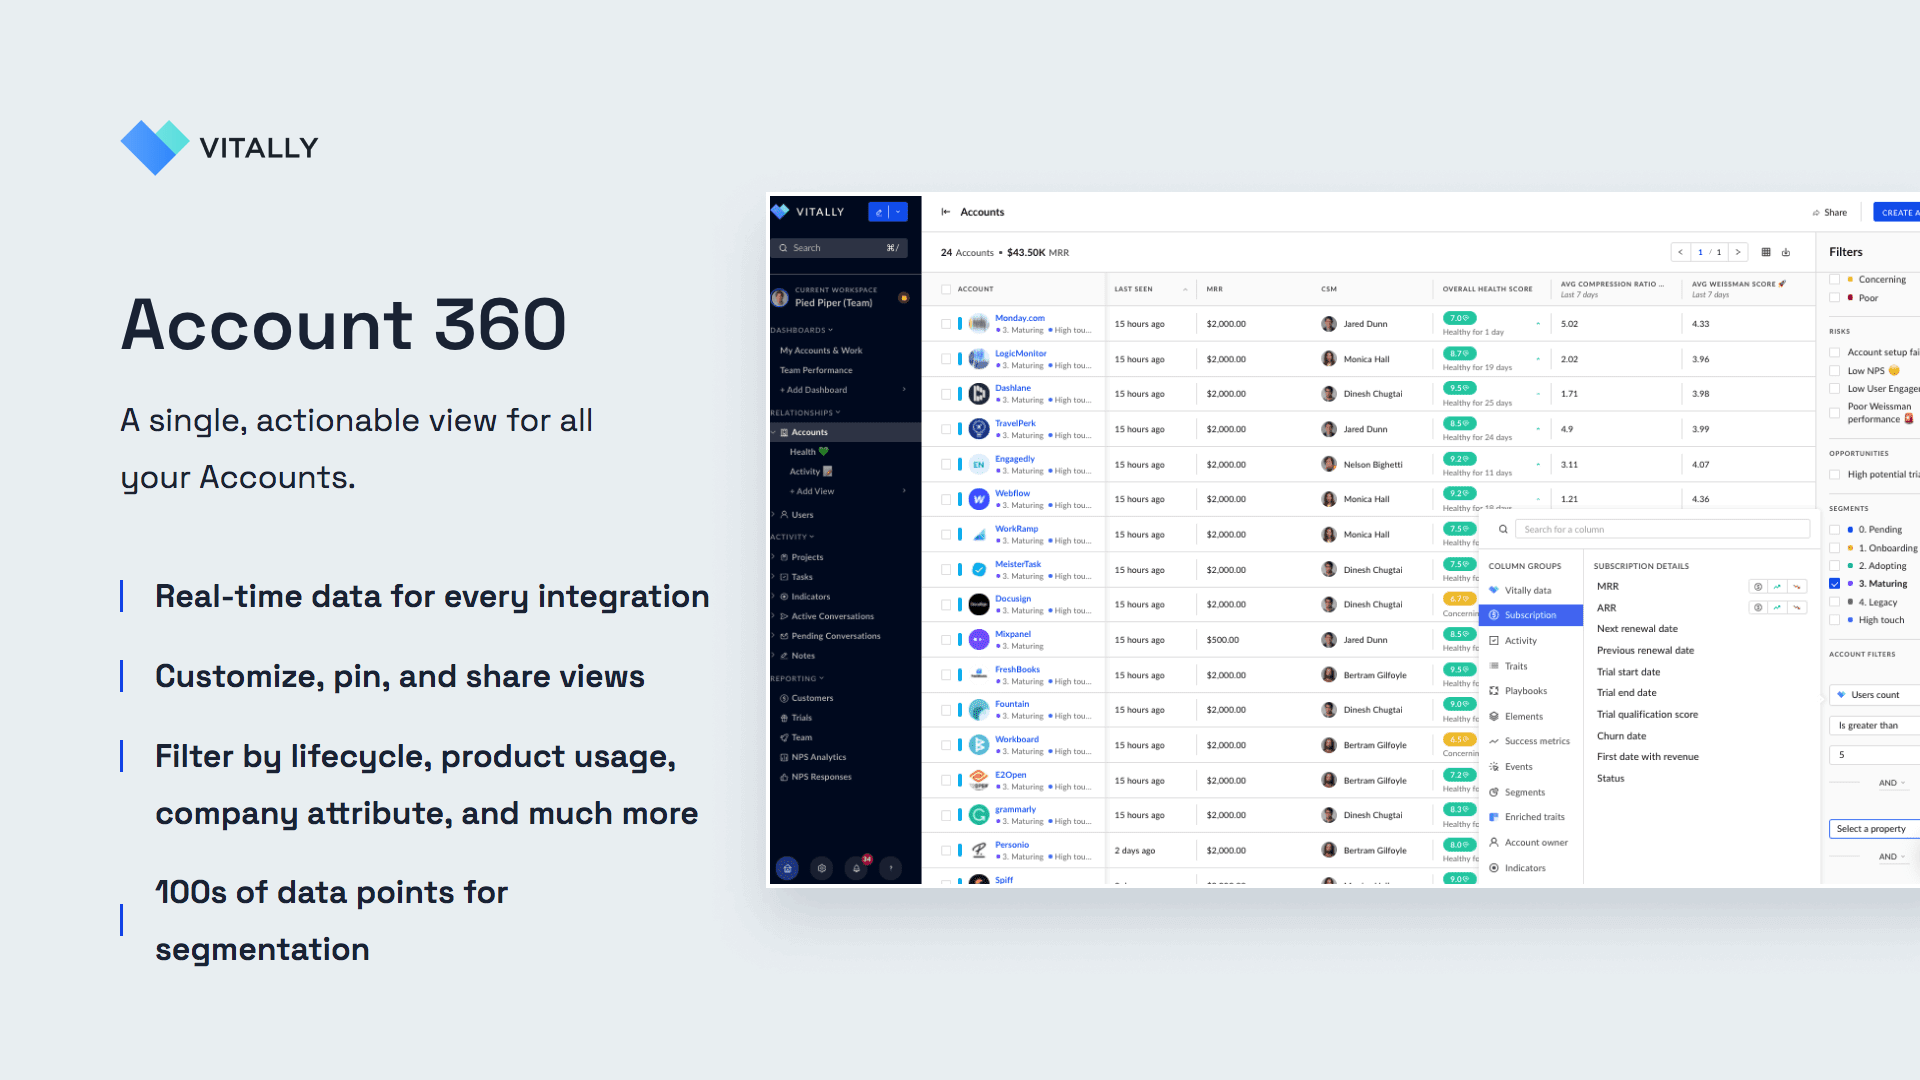 Account 360 -- 100s of data points for segmentation. Real-time data for every integration. Customize, pin, and share views. Filter by lifecycle, product usage, company attribute, and much more.